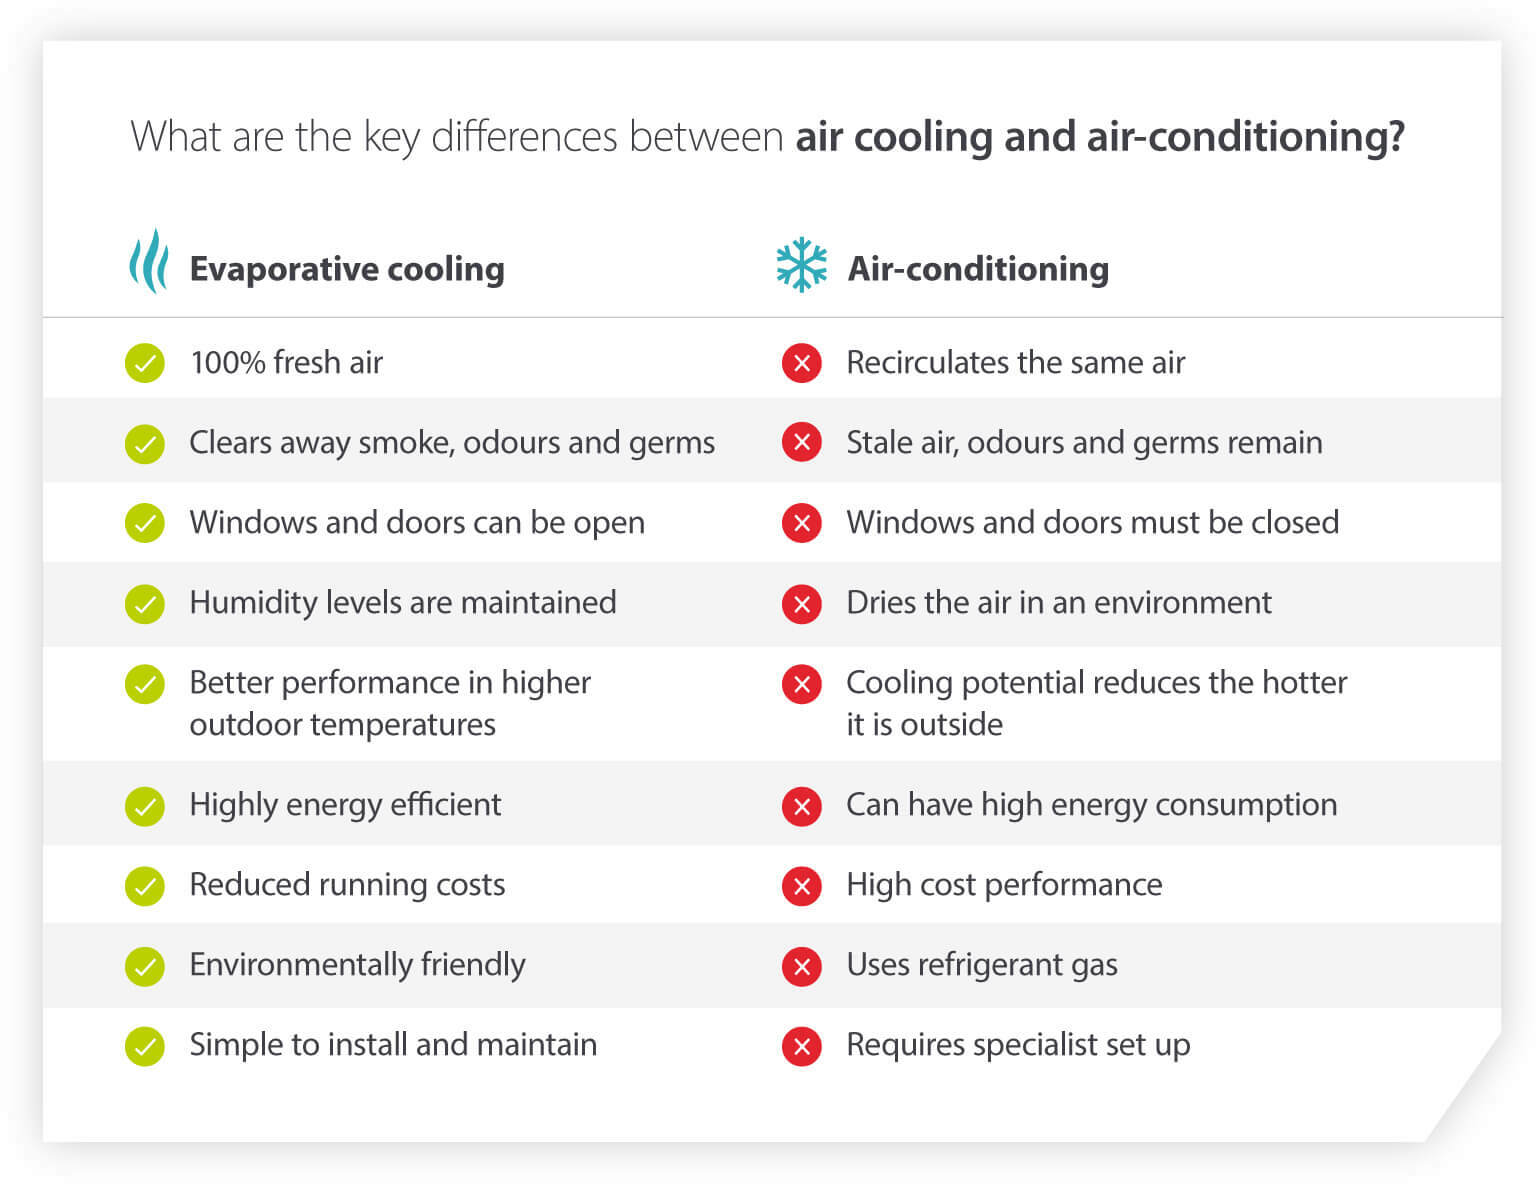 Differences between air cooling and air-conditioning